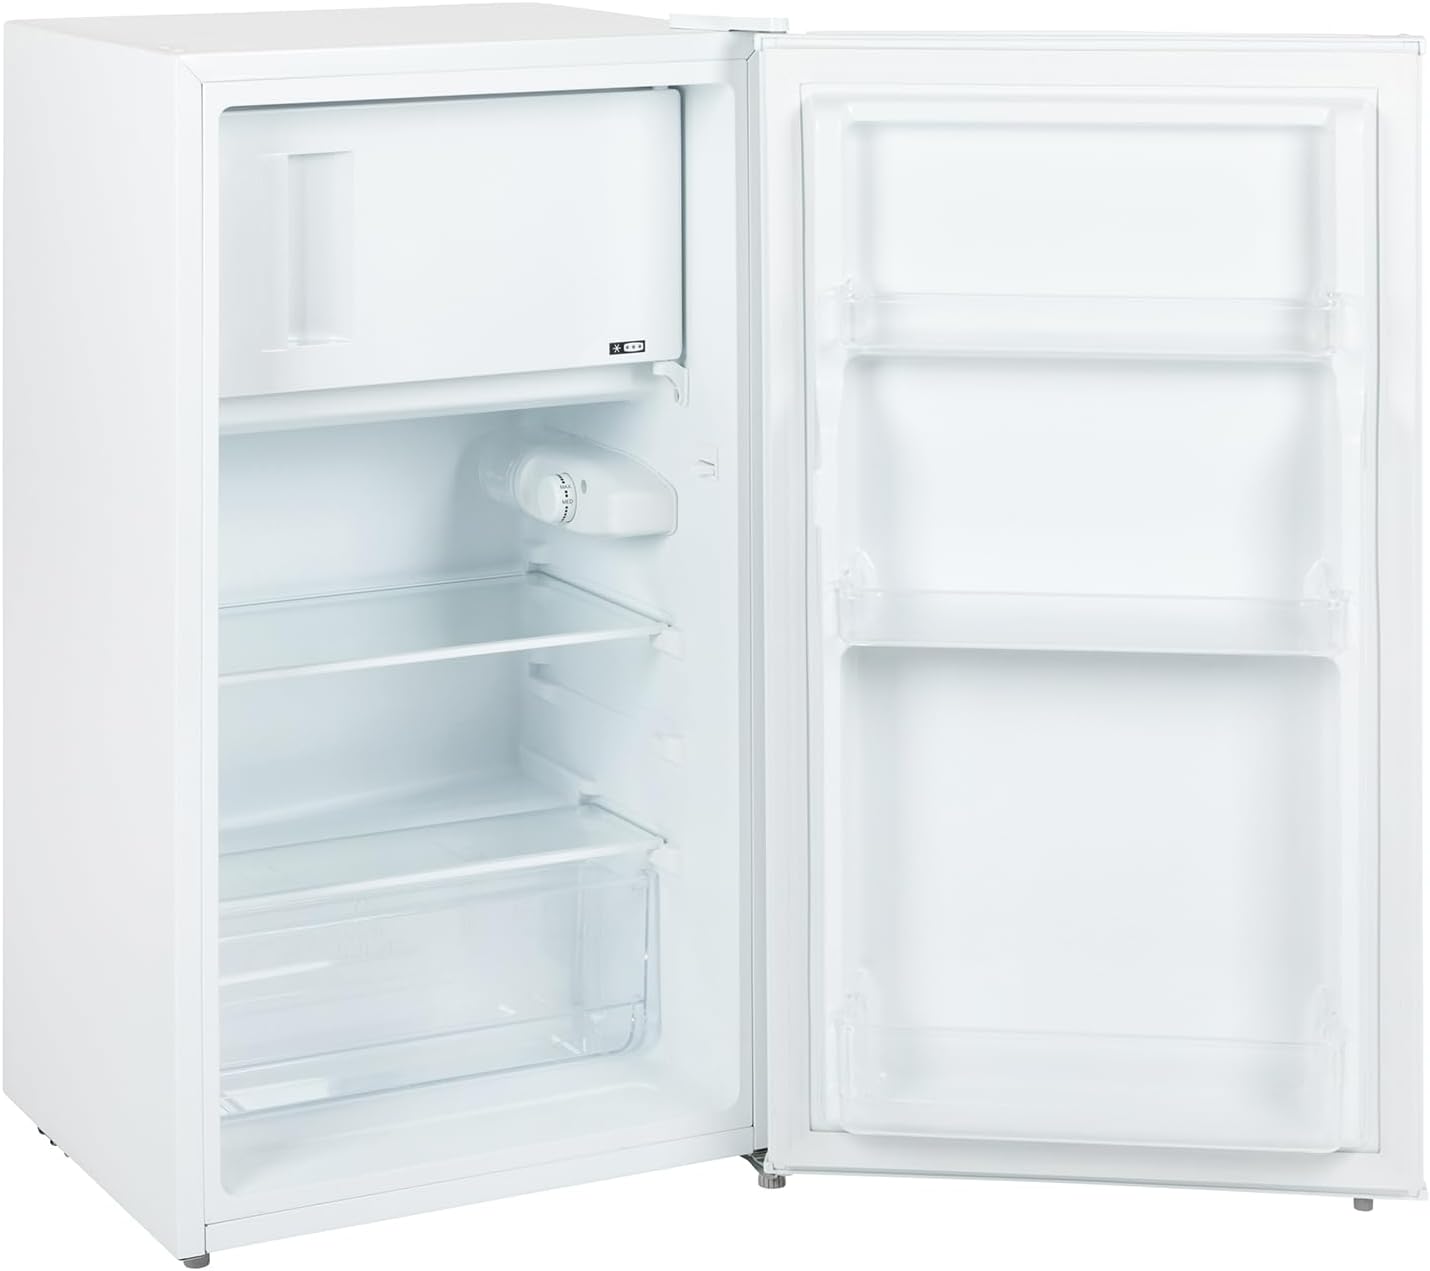 Willow WU48FC4W 80L Under Counter Fridge with Reversible Door, Adjustable Thermostat, Mark - Proof Finish, 2 Years Warranty, Low Noise - White - Amazing Gadgets Outlet